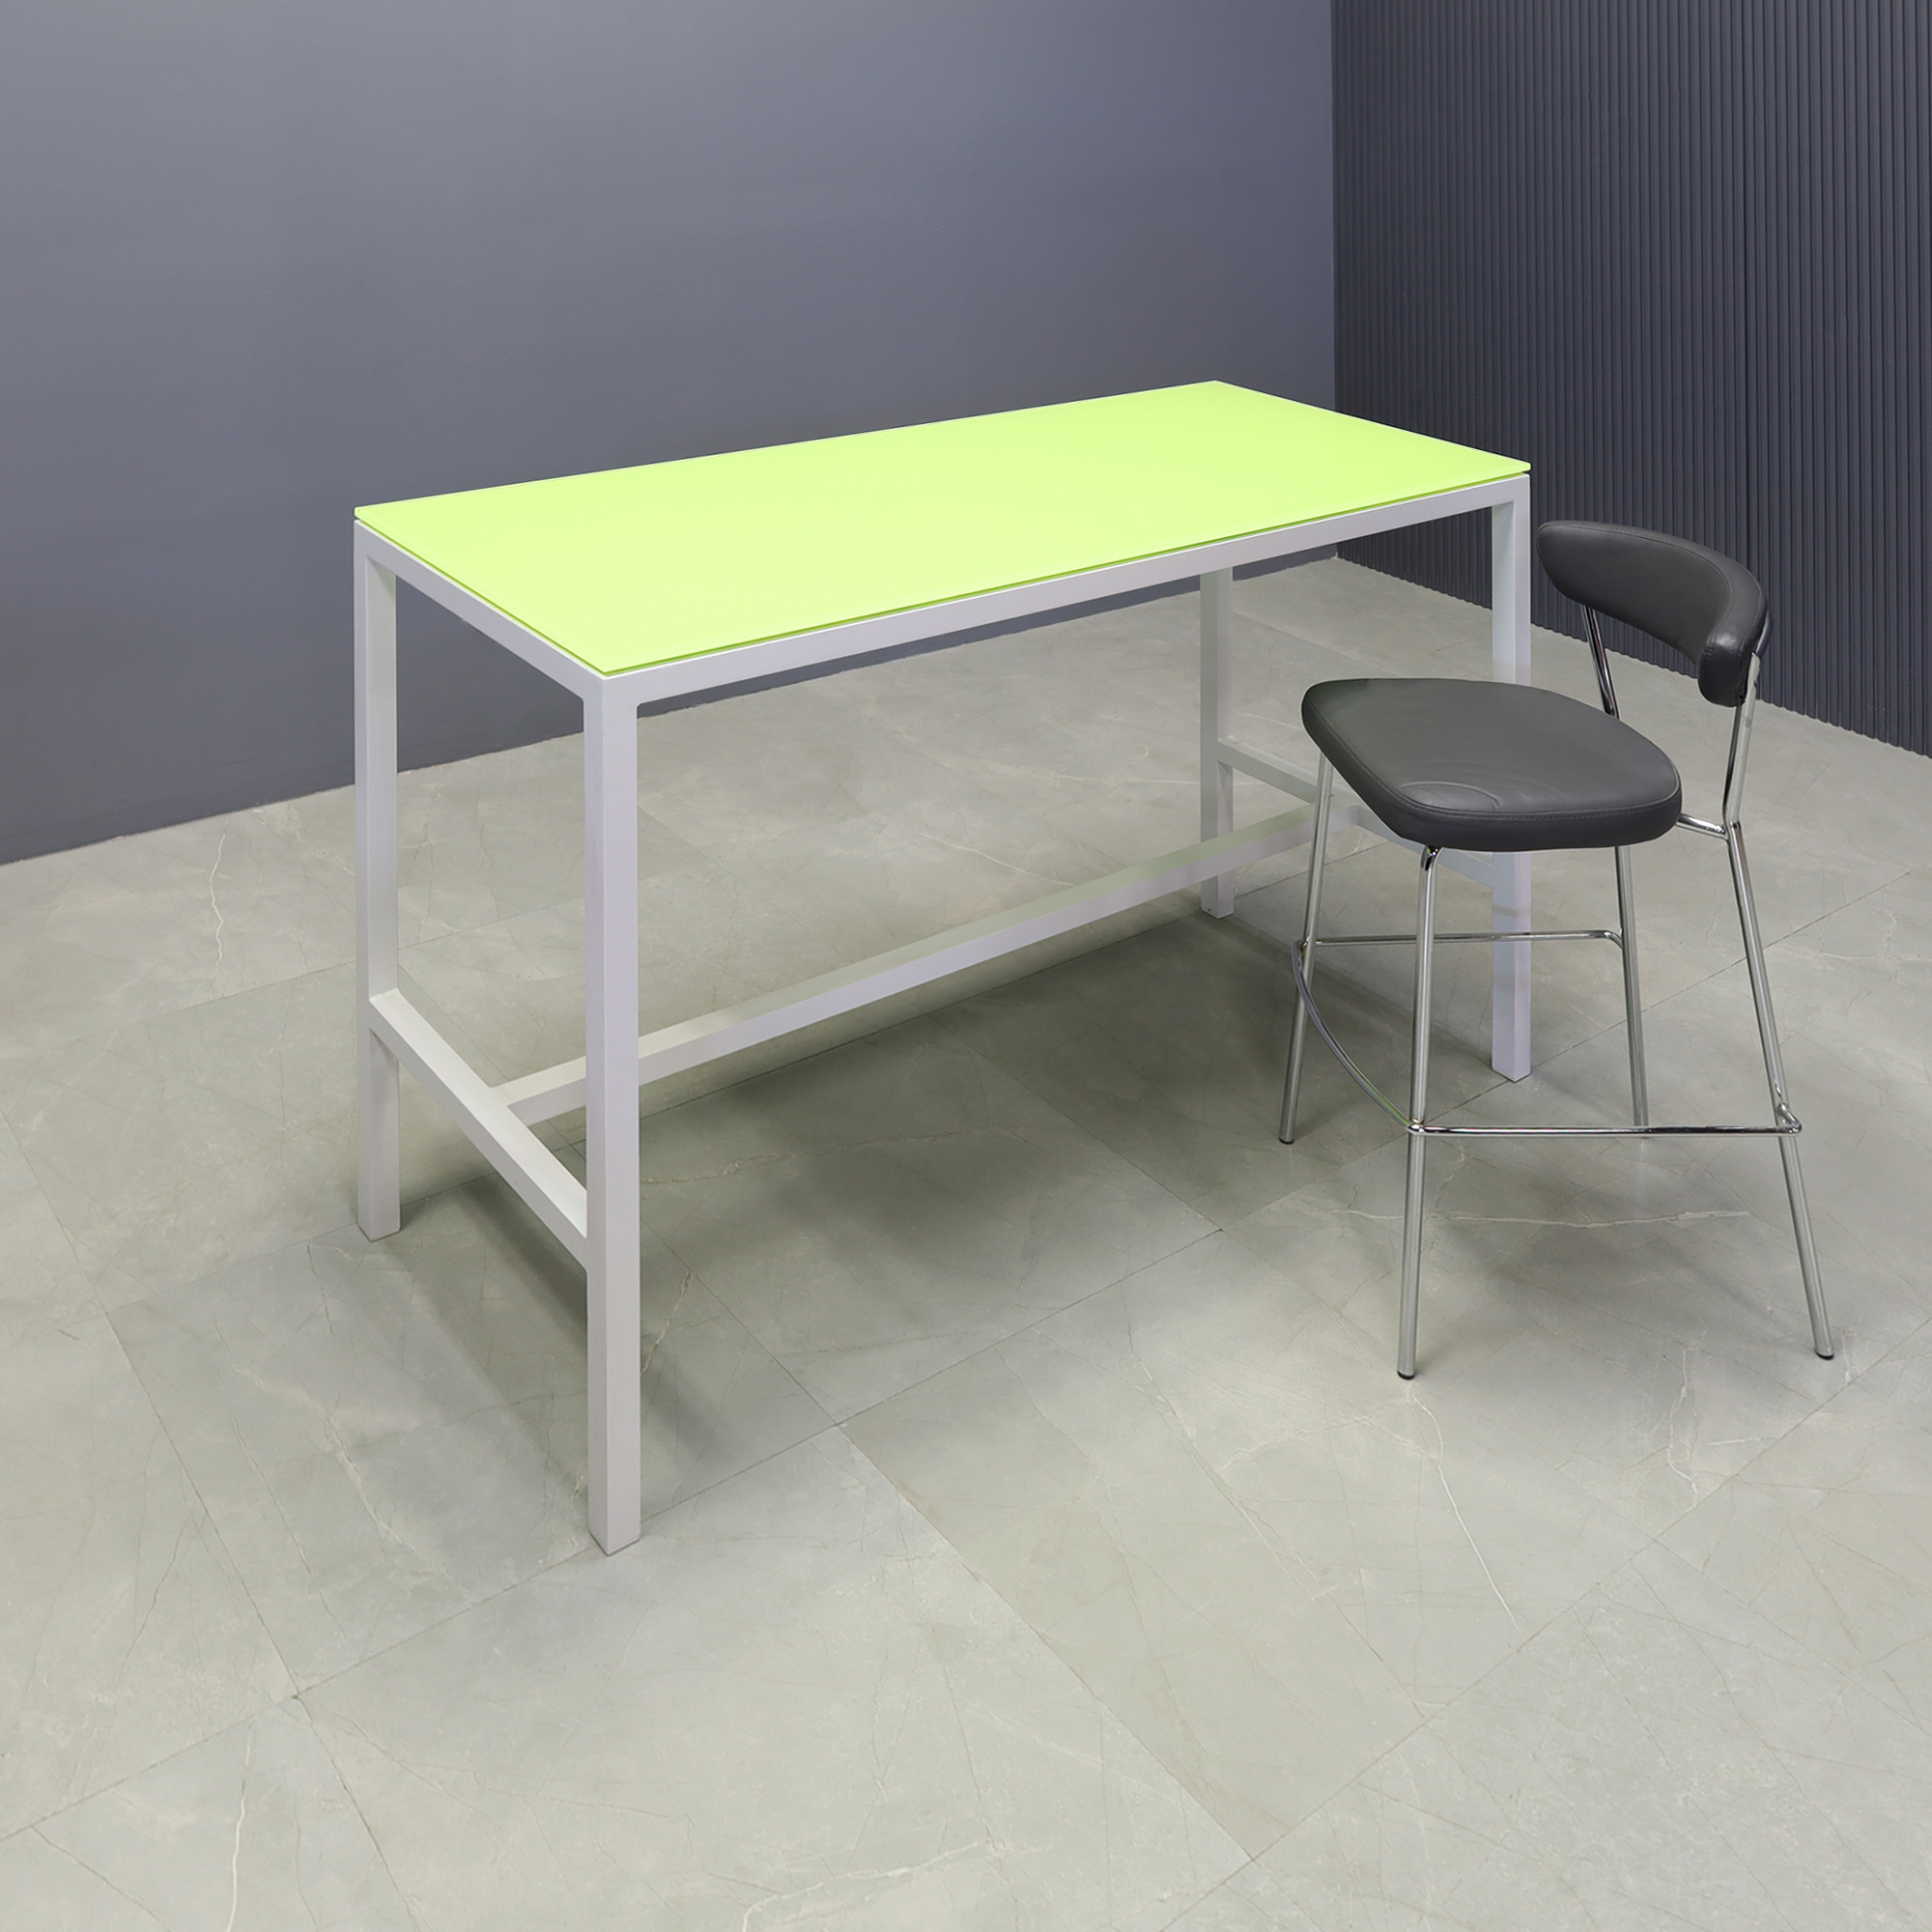 Aspen Tempered Glass Bar Table in lime top and white aluminum frame shown here.